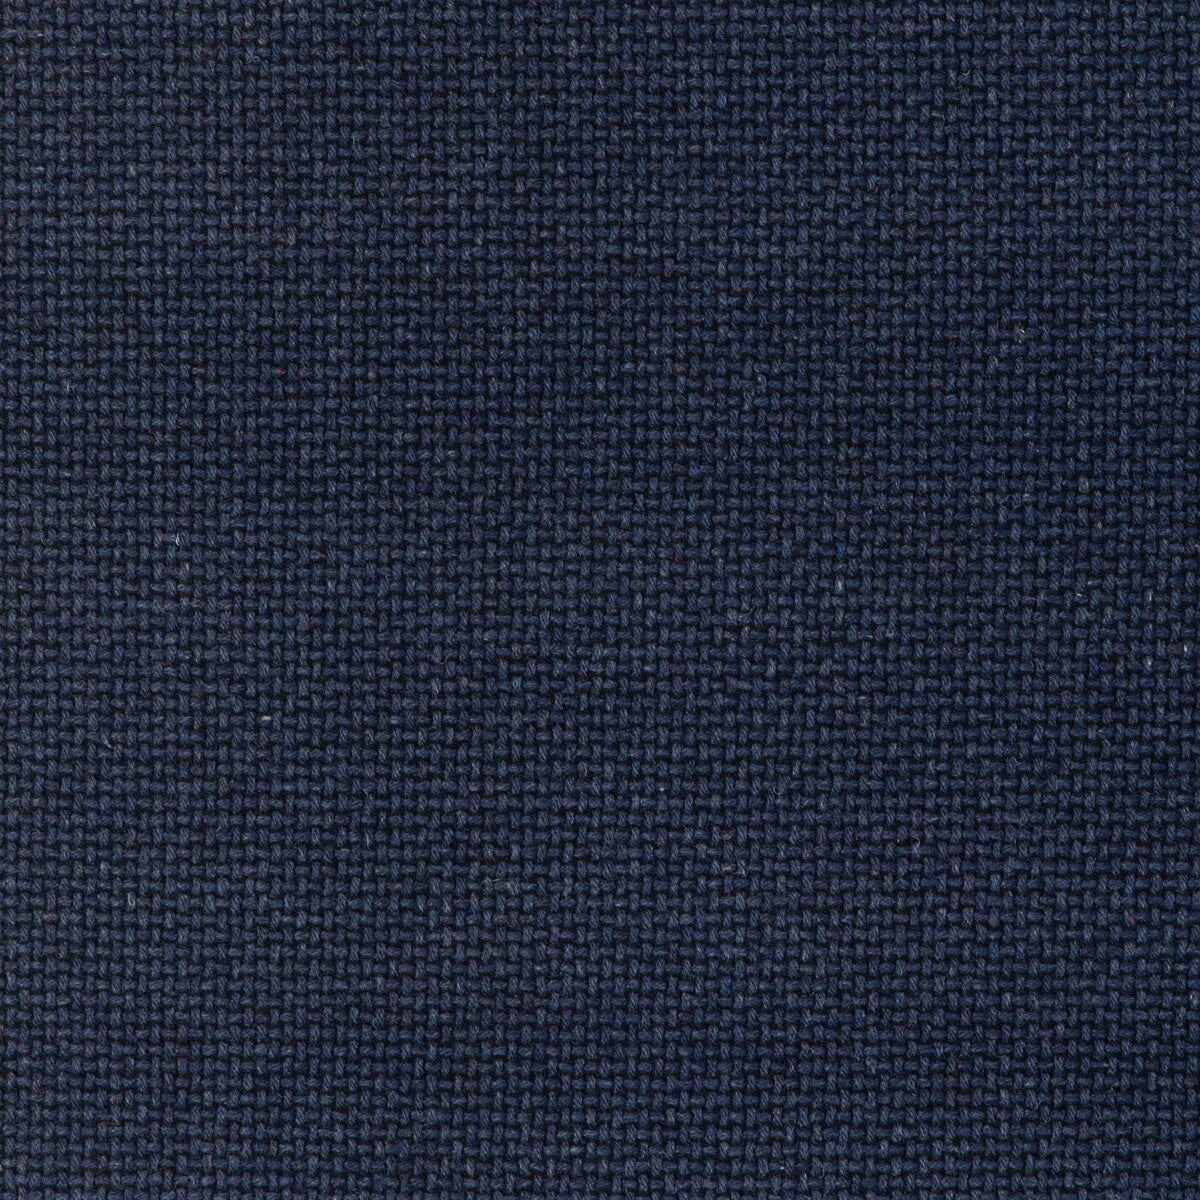 Easton Wool fabric in ink color - pattern 37027.50.0 - by Kravet Contract